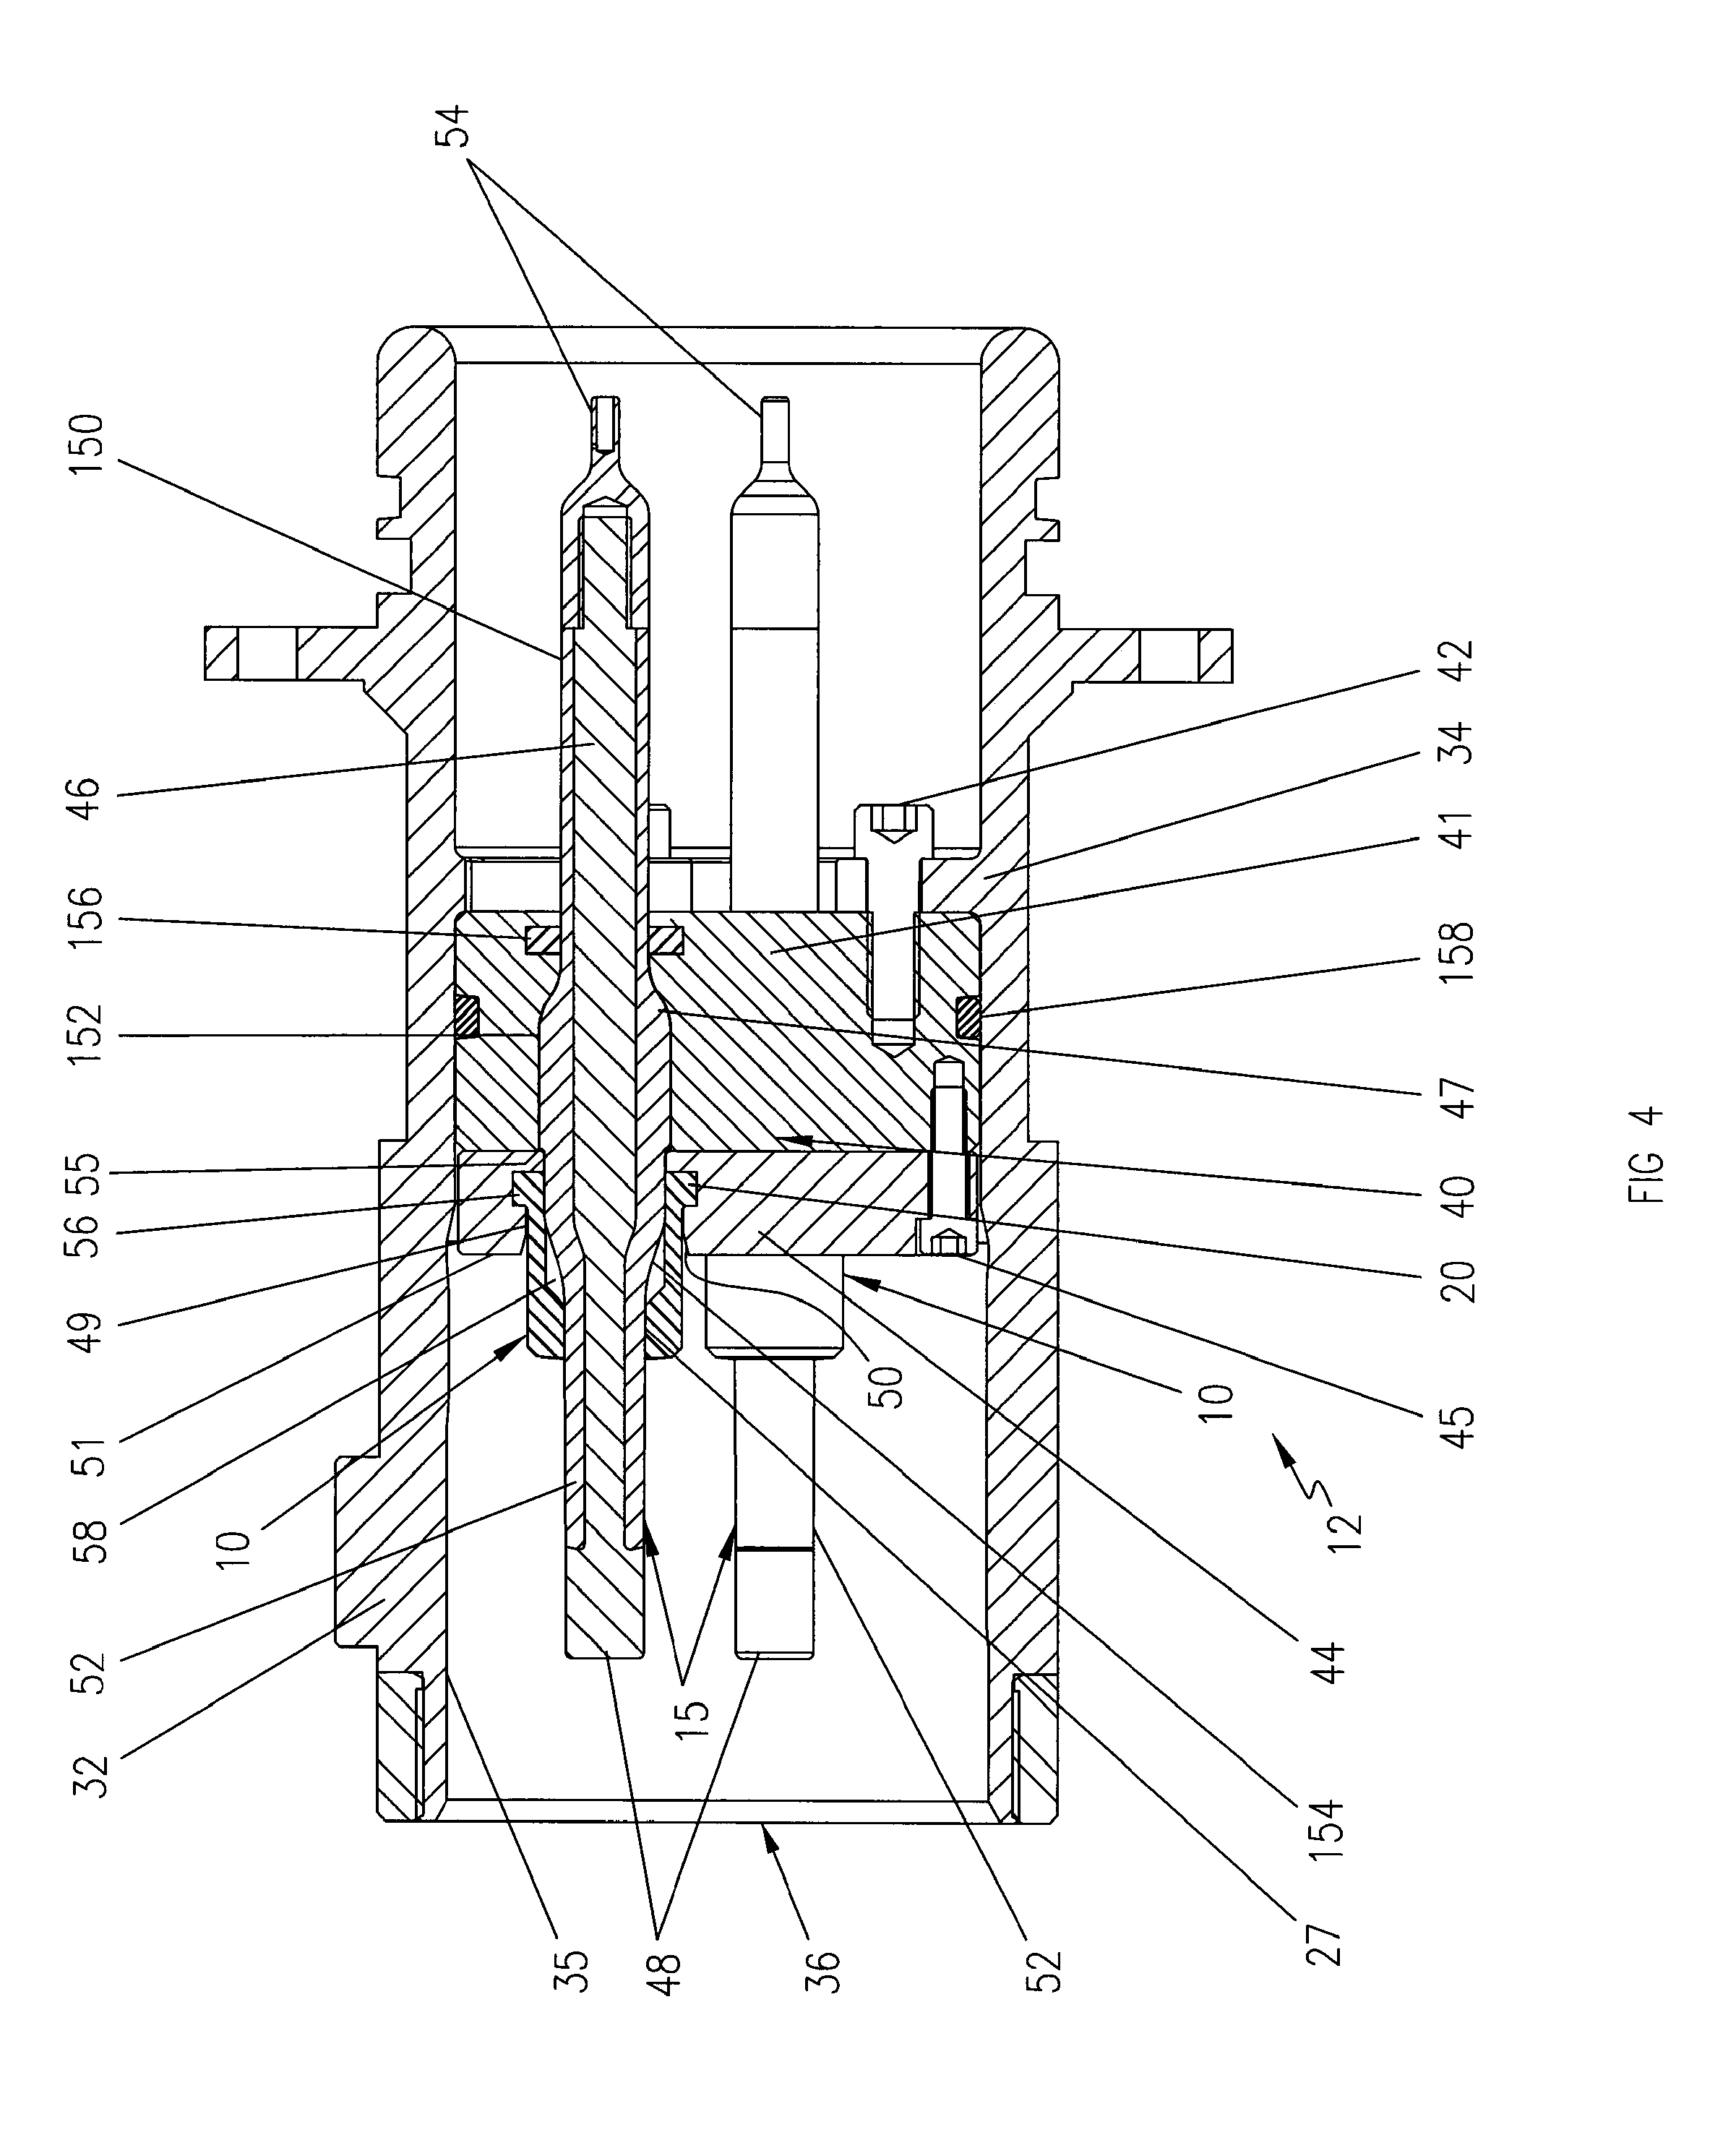 Submersible connector with secondary sealing device